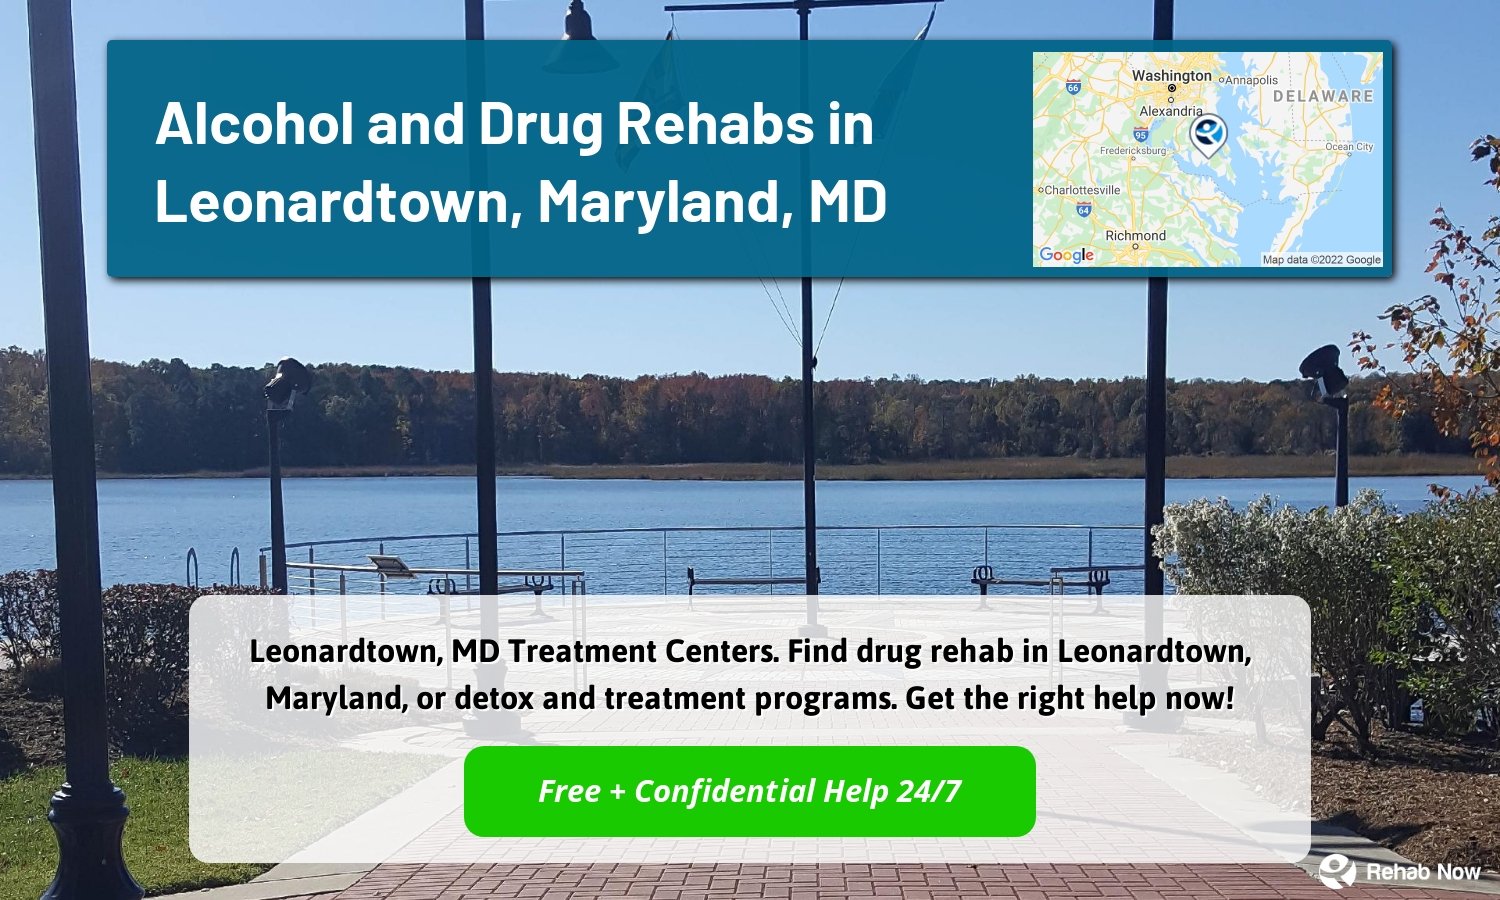 Leonardtown, MD Treatment Centers. Find drug rehab in Leonardtown, Maryland, or detox and treatment programs. Get the right help now!